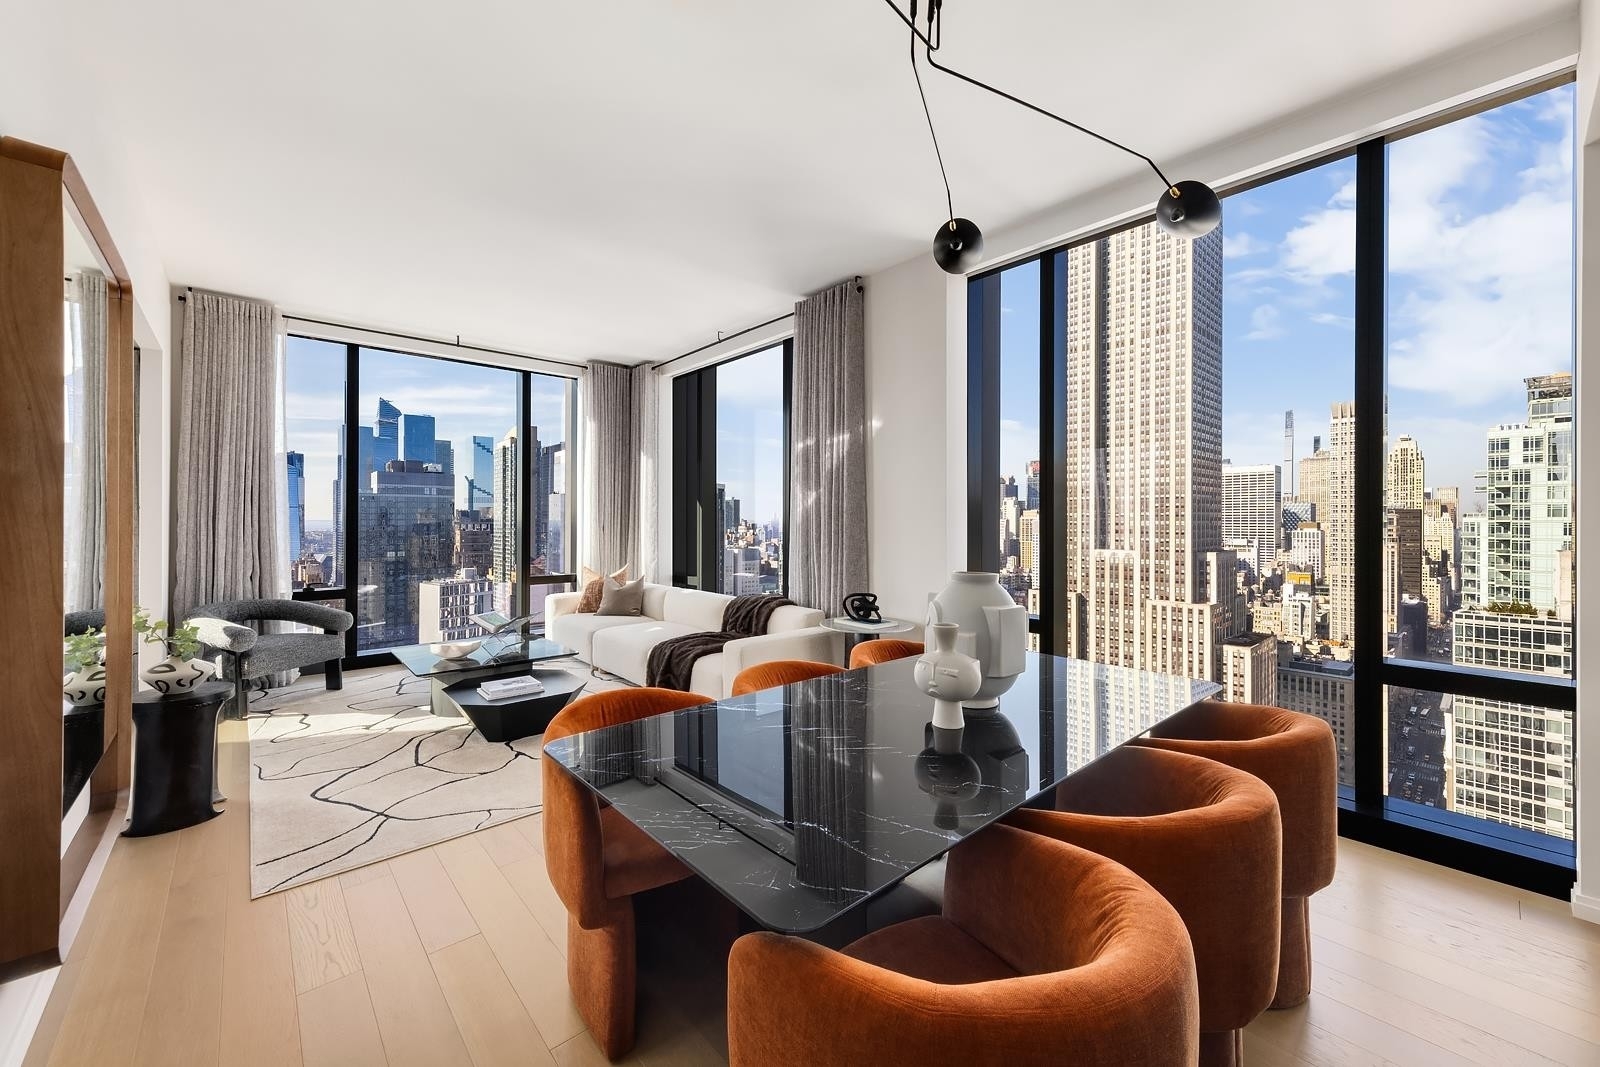 Property at 277 FIFTH AVE, 40A NoMad, New York, NY 10016